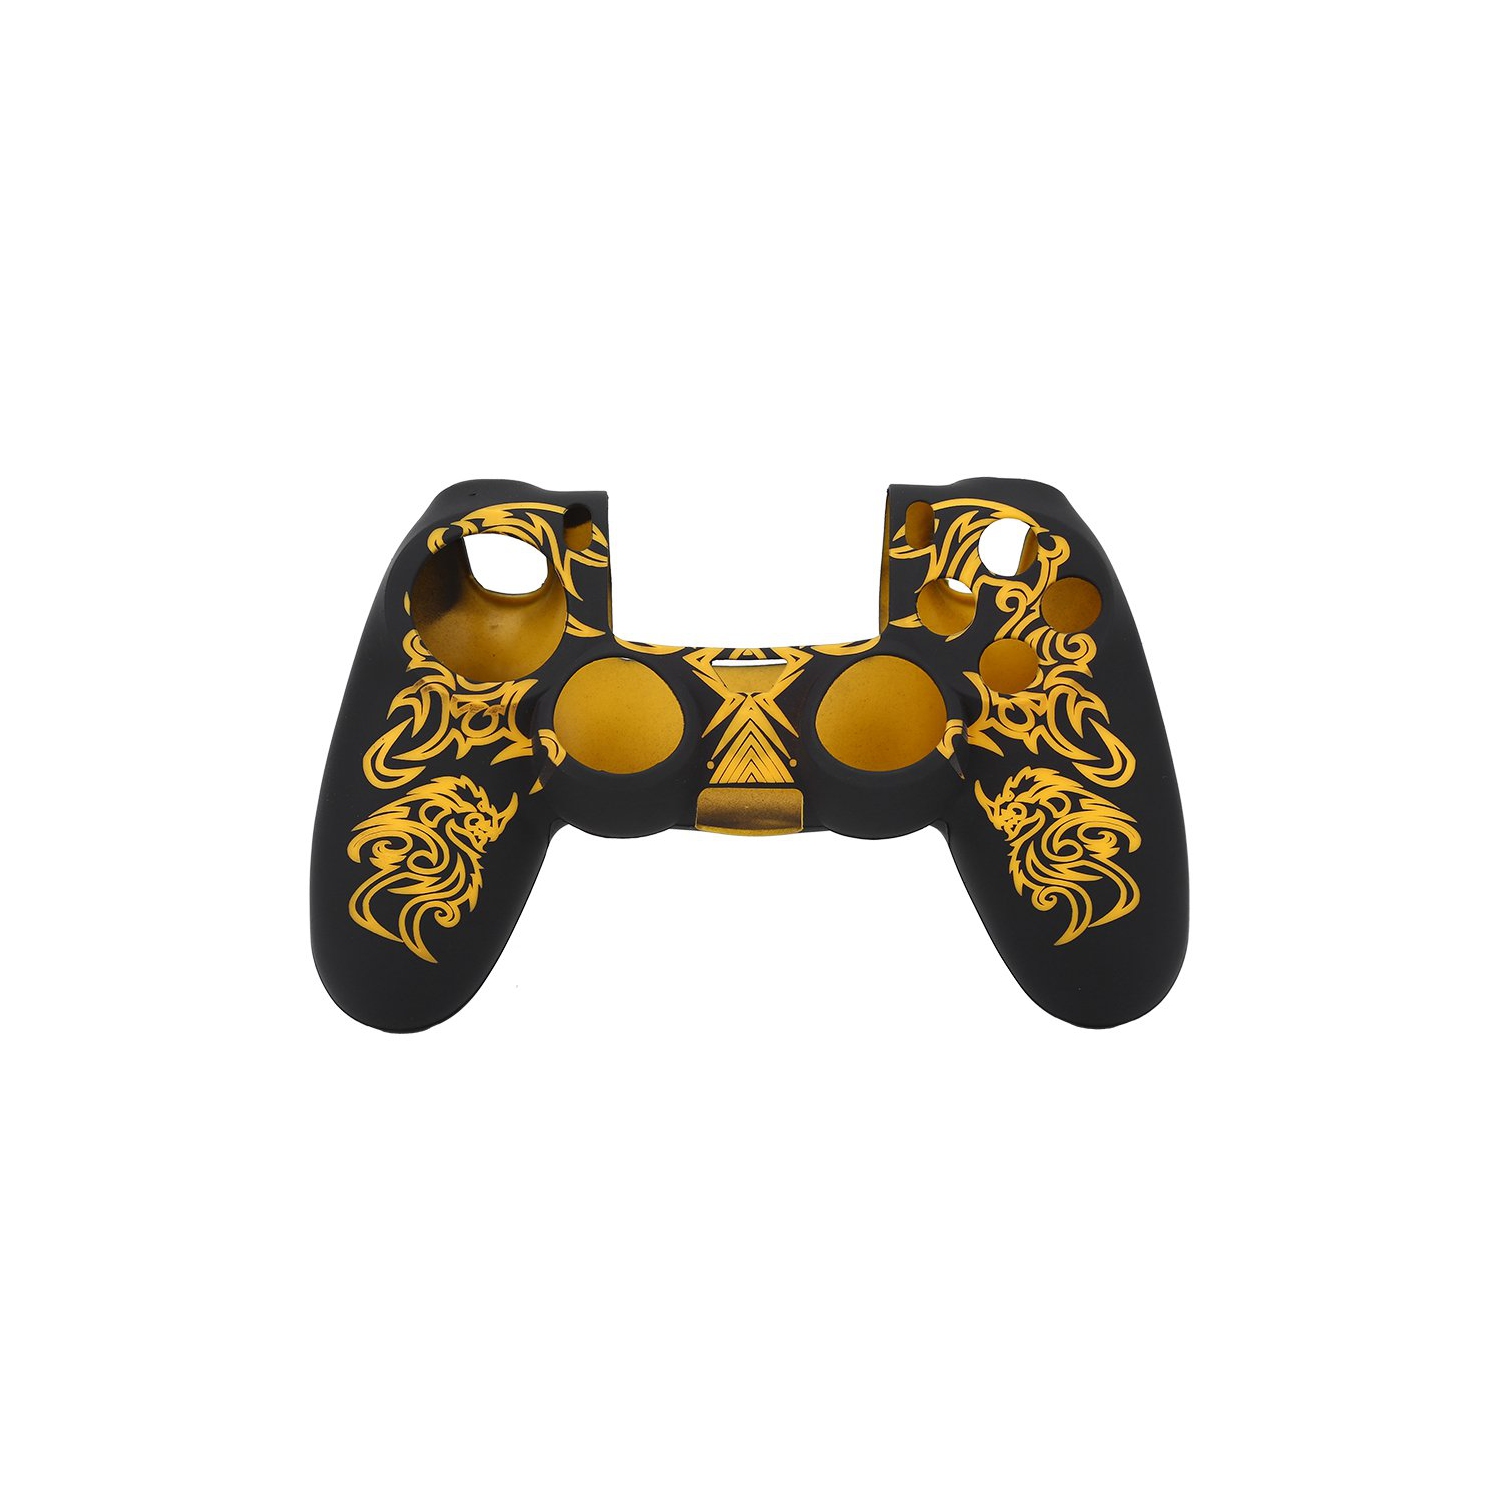 Soft Silicone Case Skin Grip Shell Cover for Sony Playstation 4 PS4 Controller (Black and Yellow)